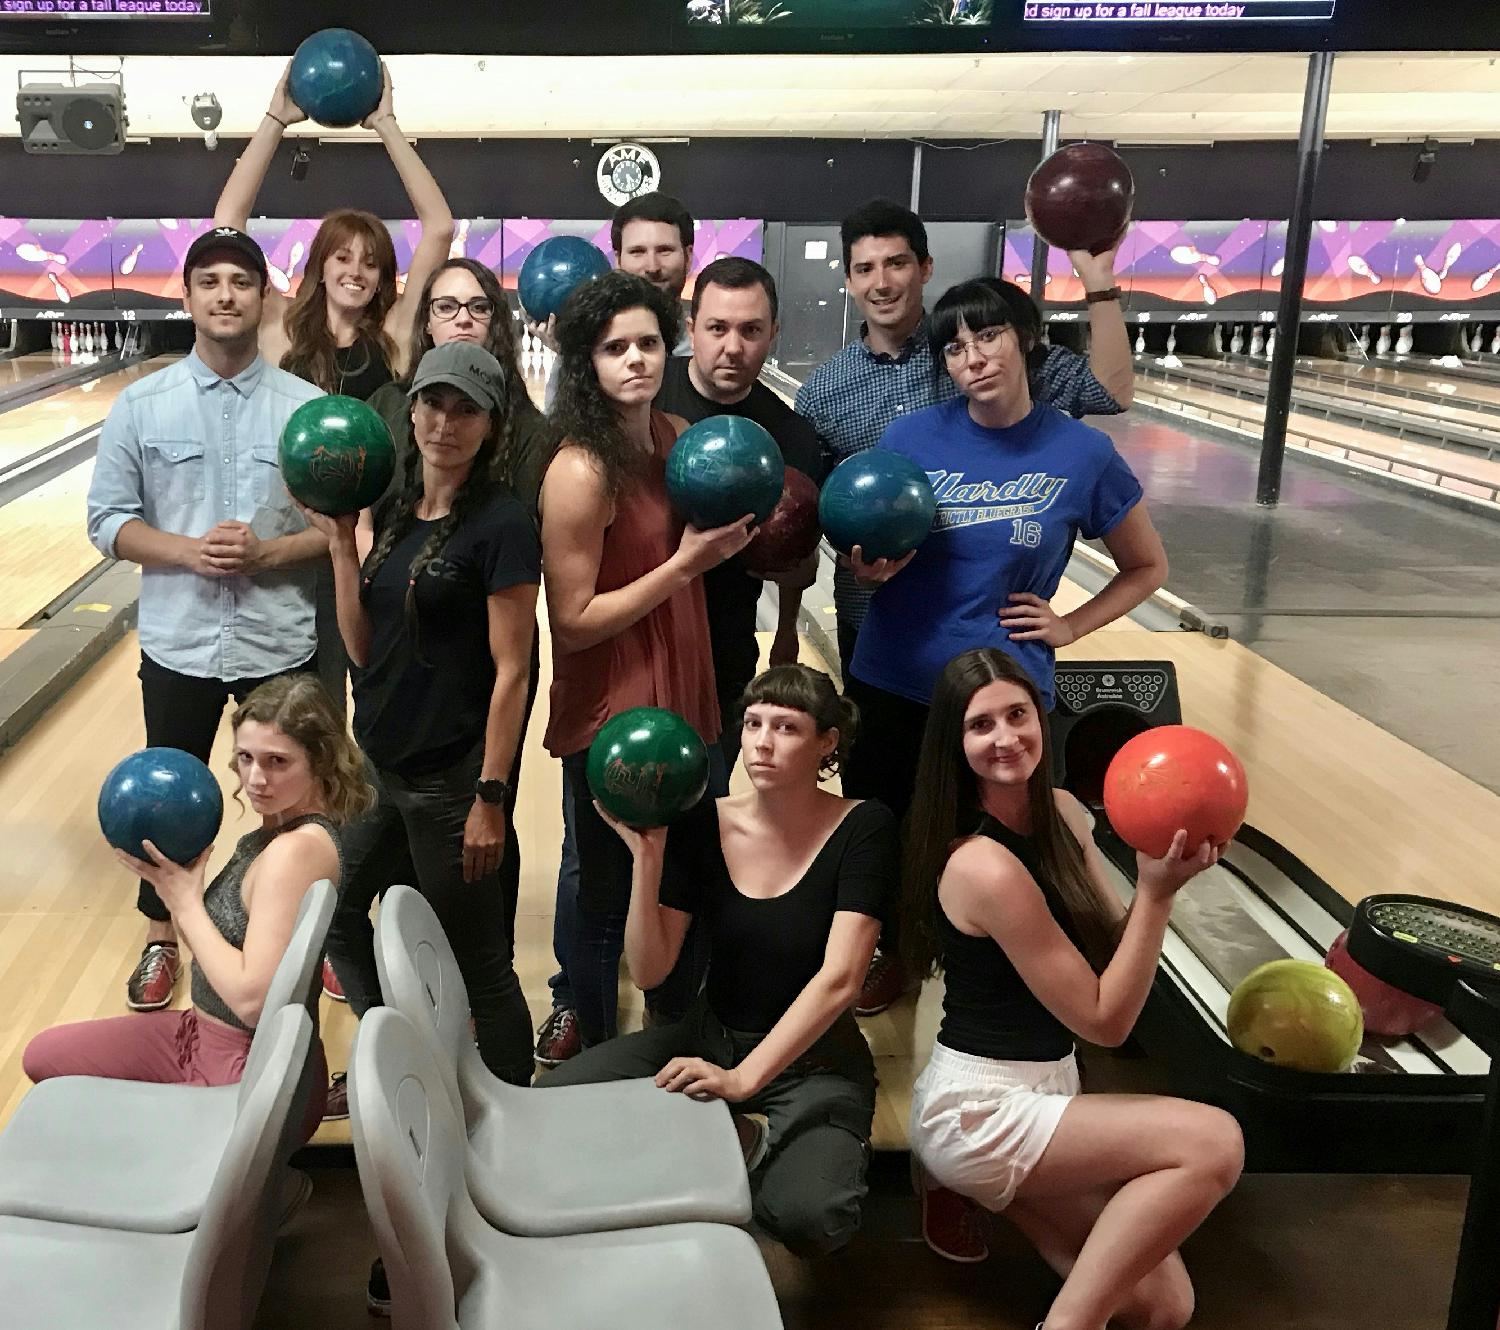 Bowling anyone? The team that plays together, stays together!